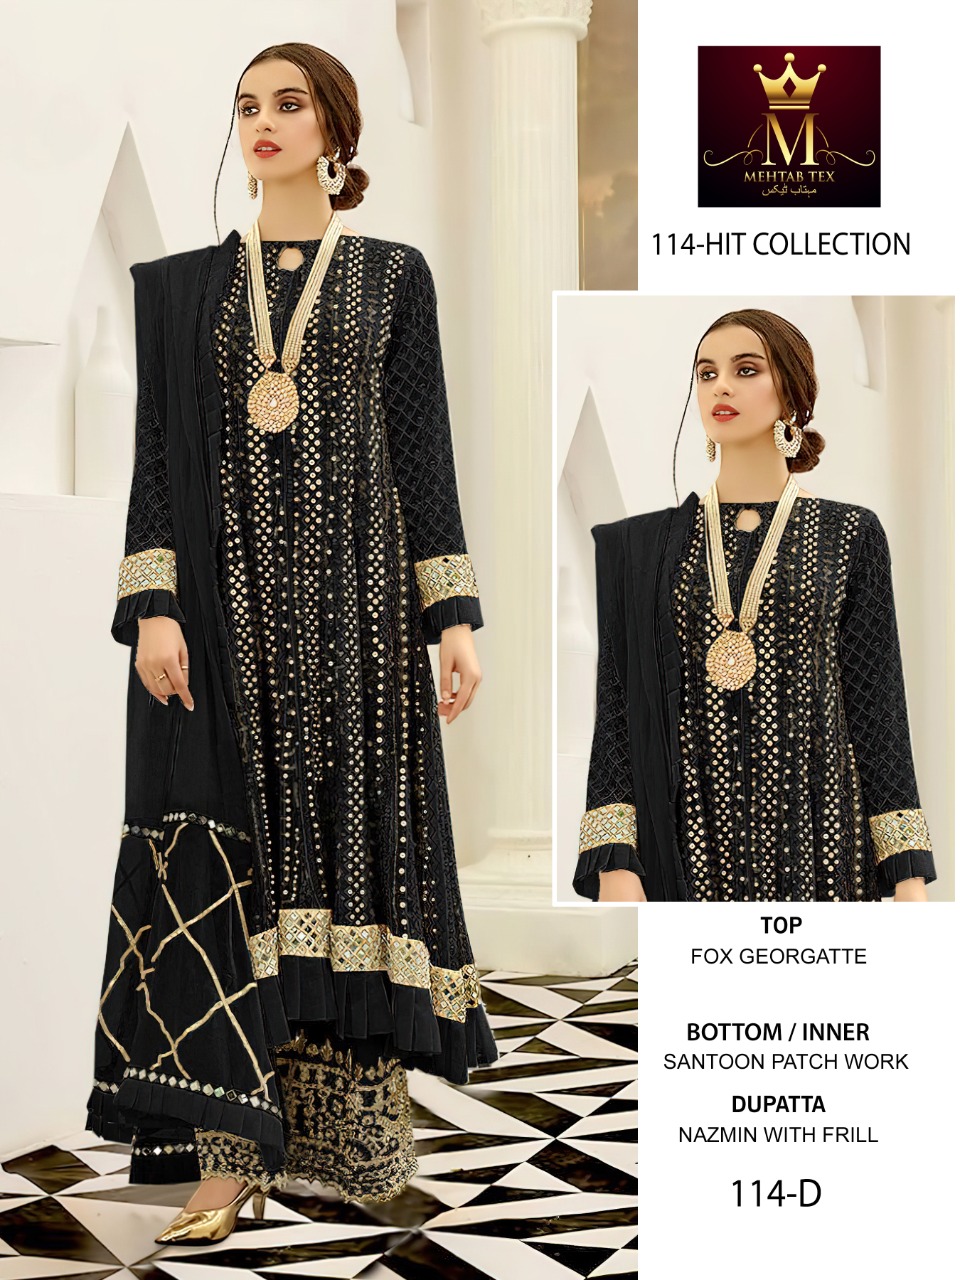 Mehtab Tex Hit Collection 114-D